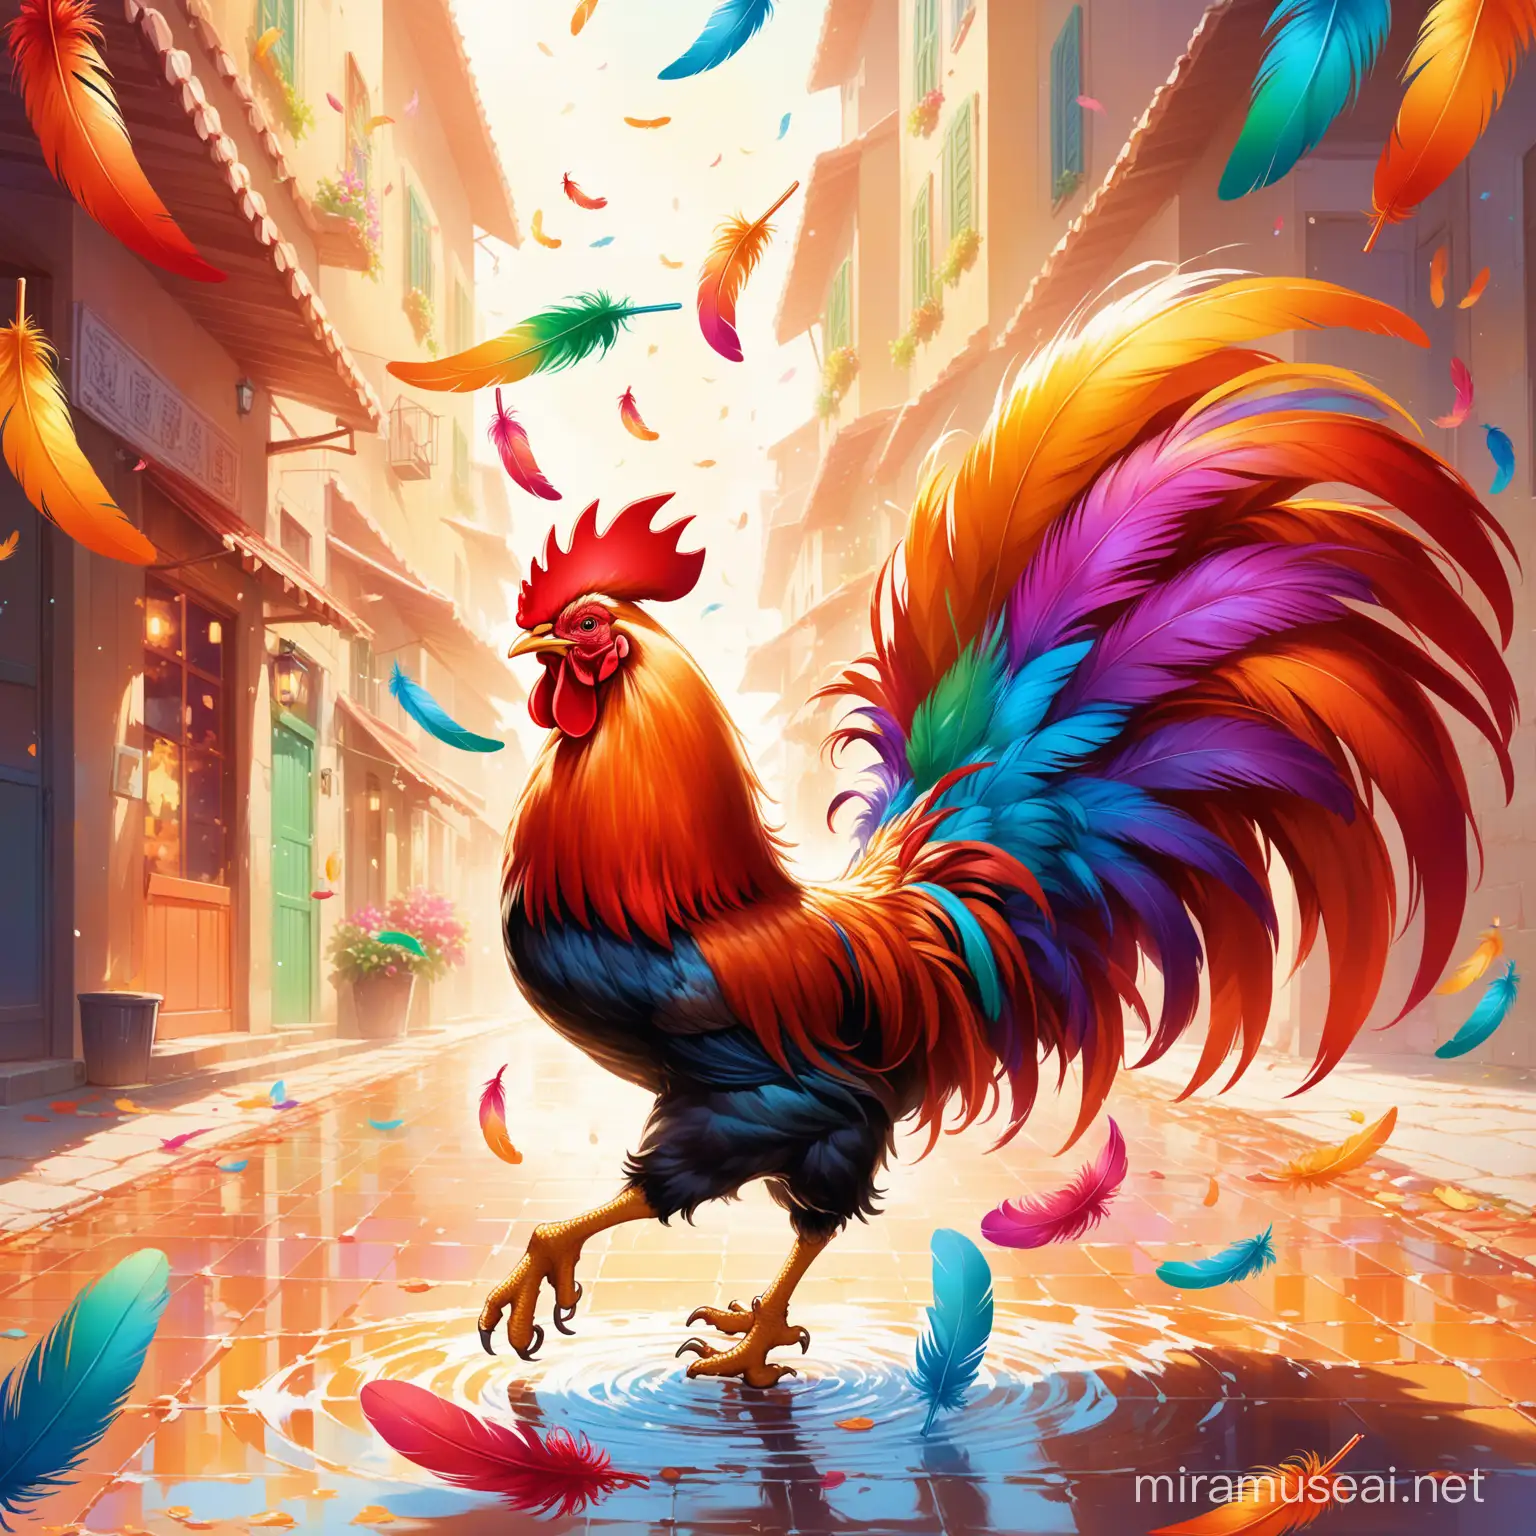 /imagine prompt: A whimsical and dynamic scene featuring a rooster with a riot of colorful feathers, with some feathers airborne, filling the space with a burst of color and movement. The rooster playfully steps on a puddle of orange-colored ink, adding a touch of spontaneity and fun to the composition. The background is transparent, allowing the focus to remain on the vibrant feathers and the playful antics of the rooster. The image is rendered with a blend of realism and artistic interpretation, capturing the energy and liveliness of the scene. Soft, diffused lighting enhances the colors and textures, creating a visually captivating and lively atmosphere. The mood is cheerful and whimsical, inviting viewers to enjoy the playful charm of the moment --ar 16:9 --v 5 --q 2